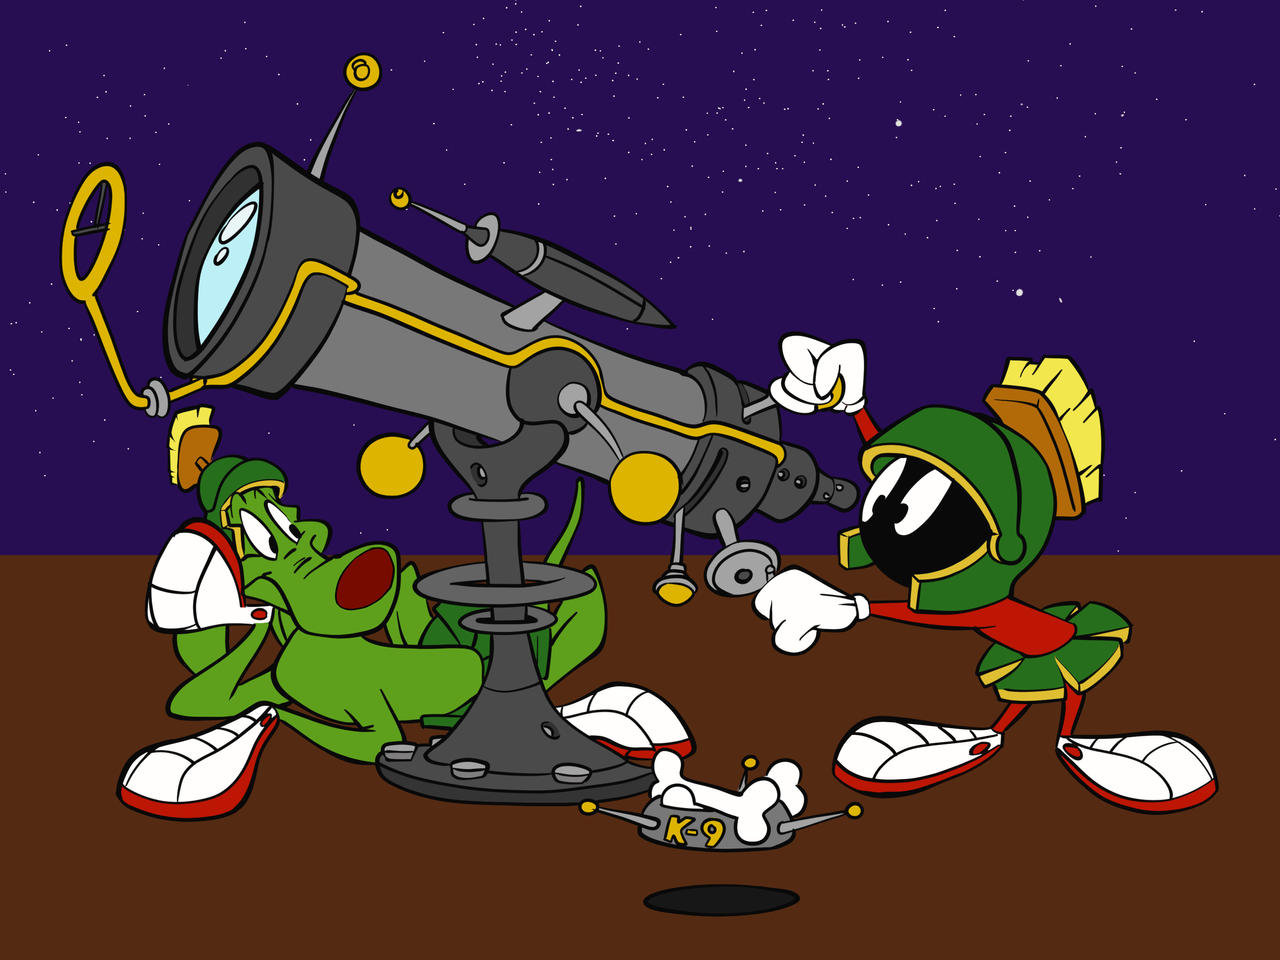 Marvin the Martian and K9